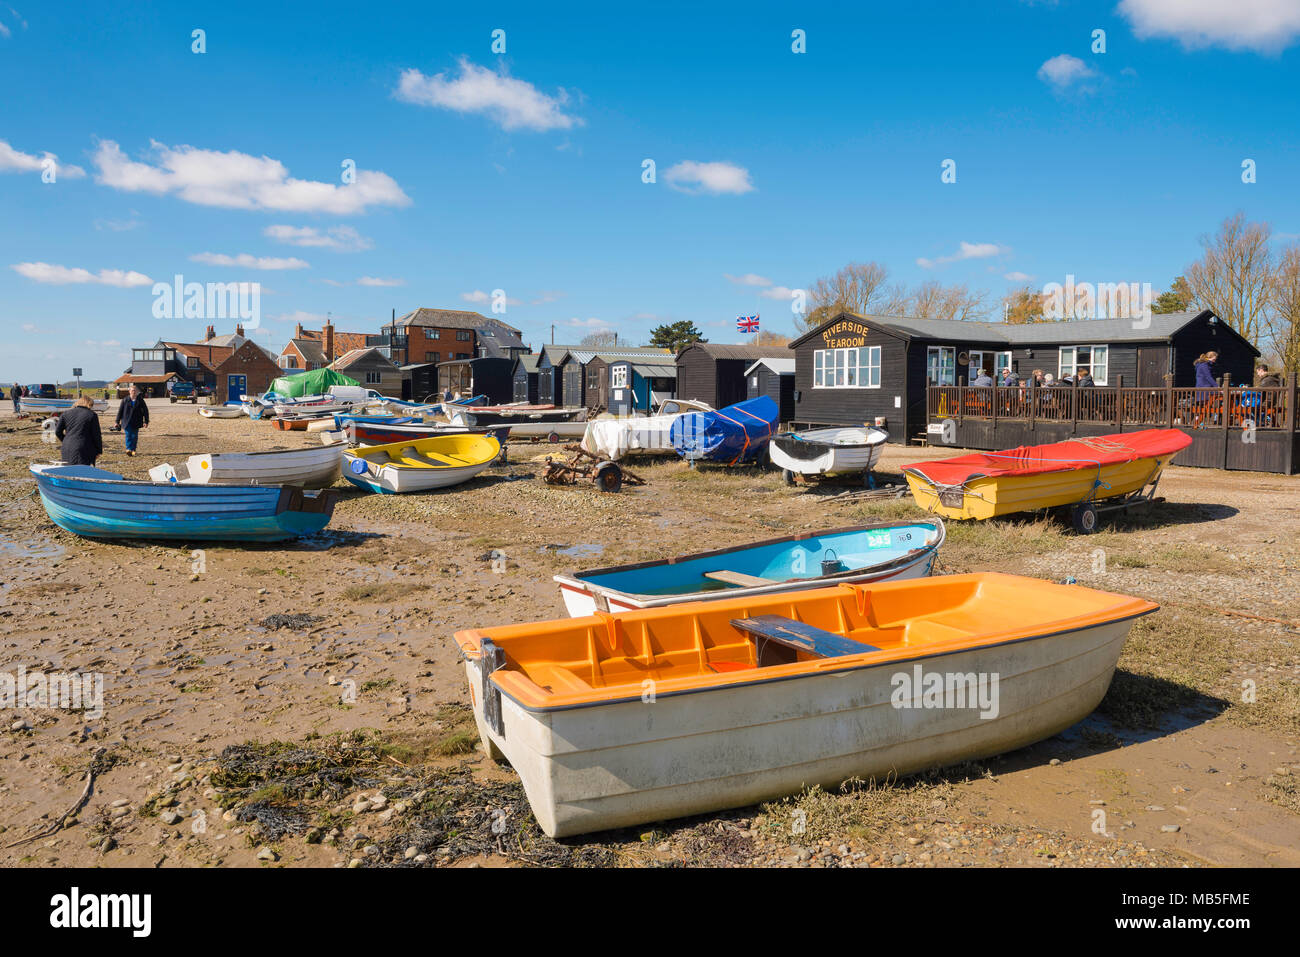 Suffolk coast UK, view of colourful boats and a tea shop on the beach at Orford quay, Suffolk, East Anglia, England, UK. Stock Photo